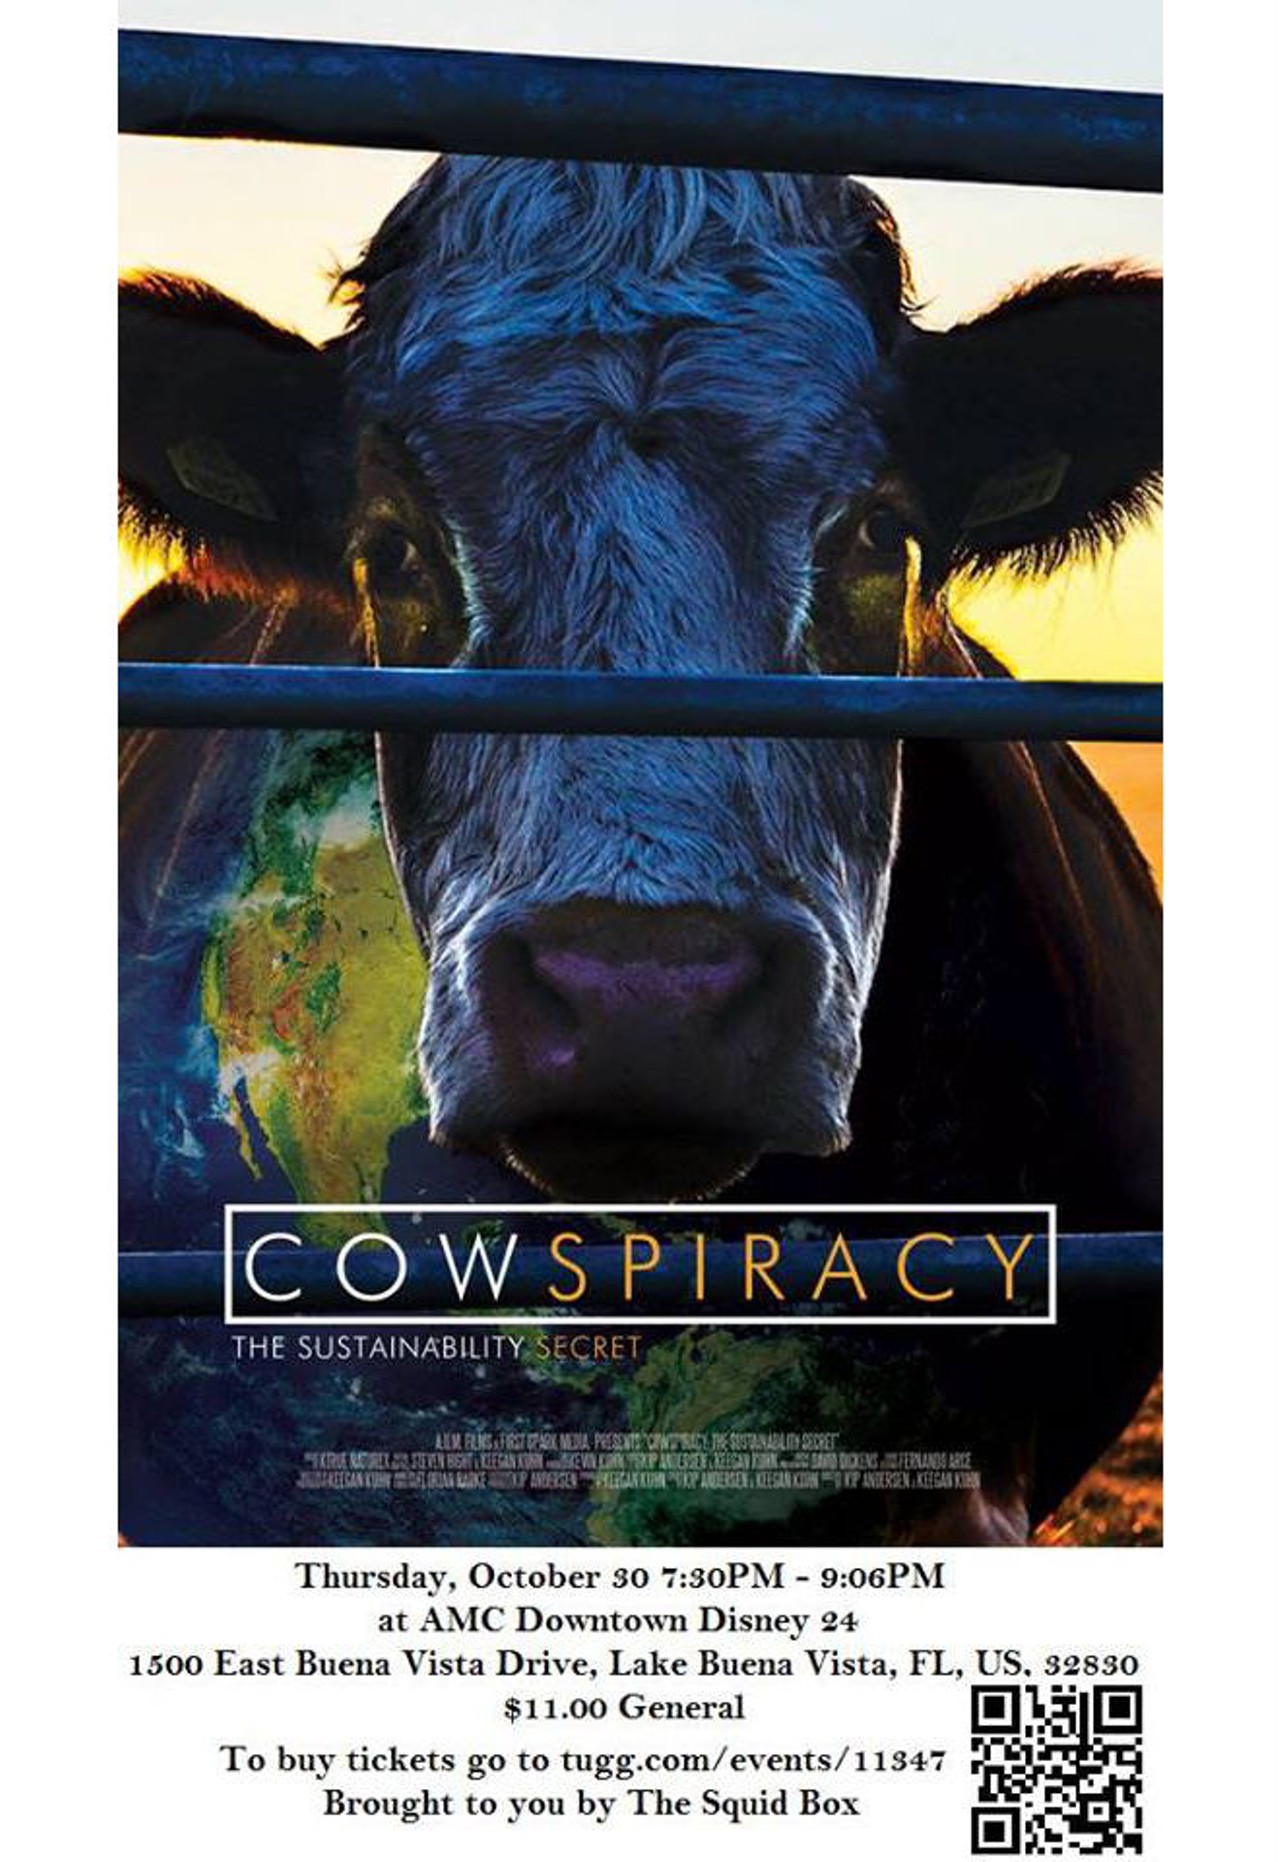 Thursday, Oct. 30CowspiracyWatch Cowspiracy on the big screen and learn more about animal agriculture.